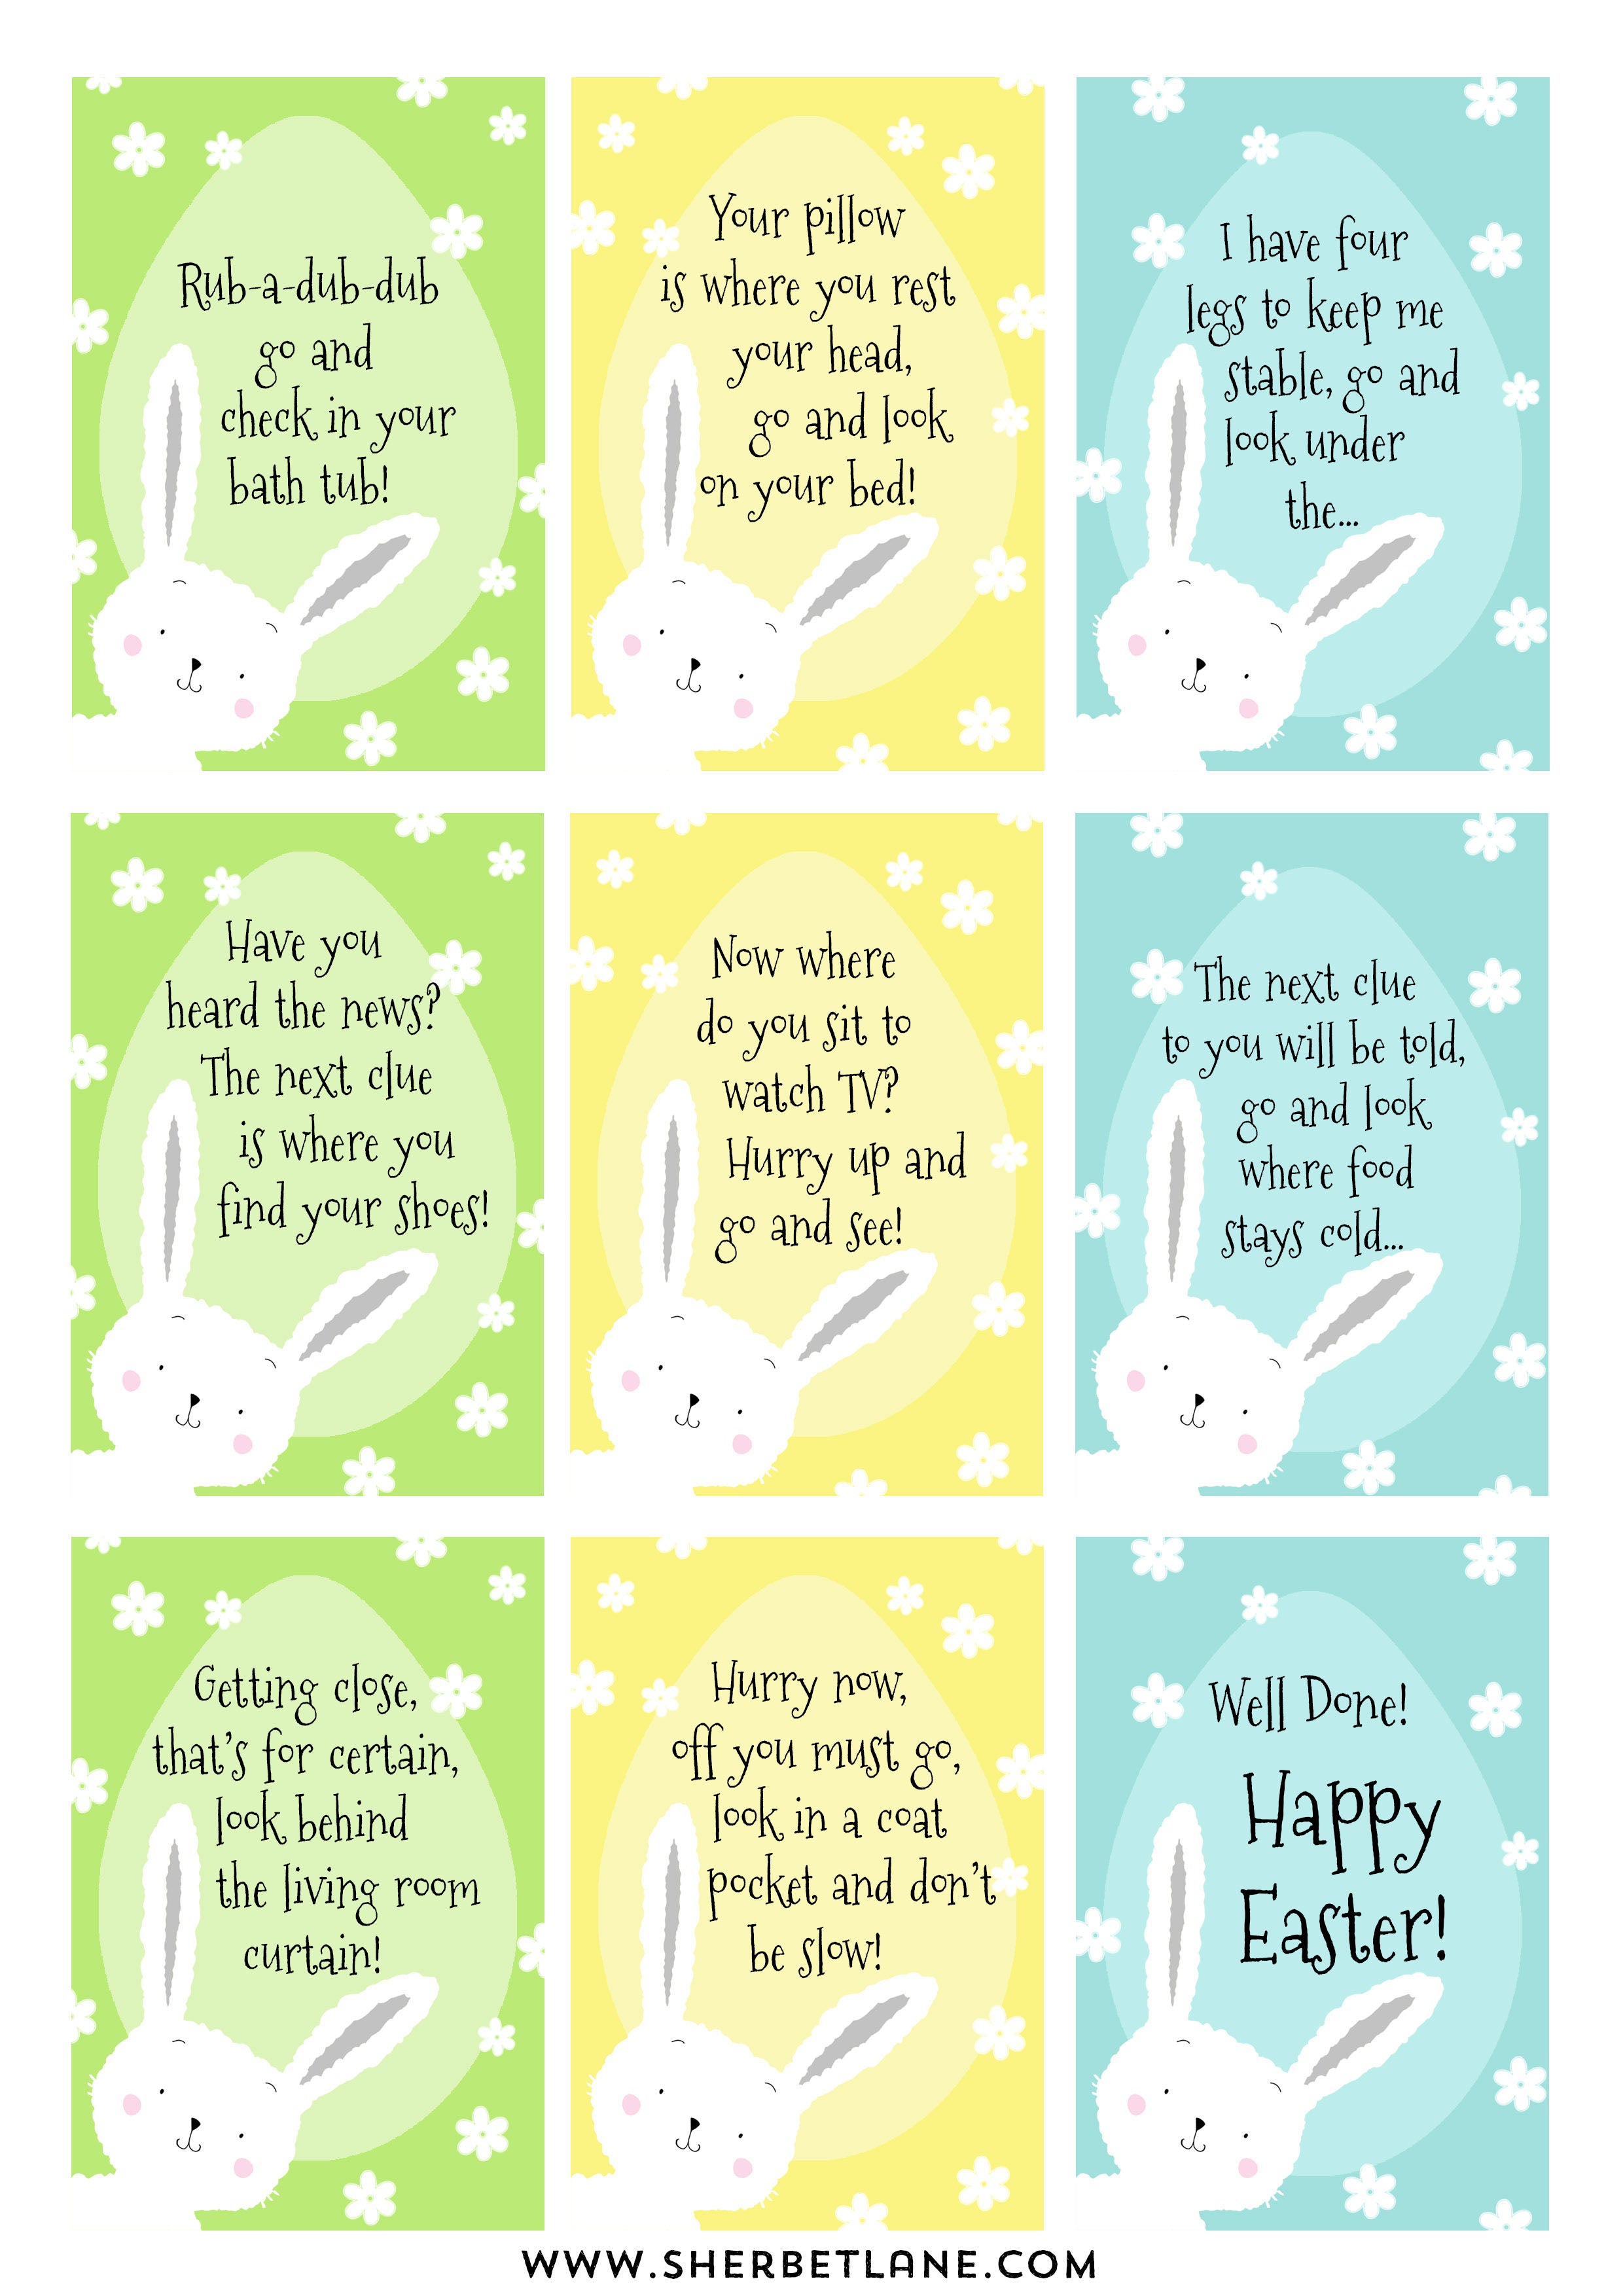 easter-egg-hunt-clues-with-free-printable-in-2020-easter-egg-hunt